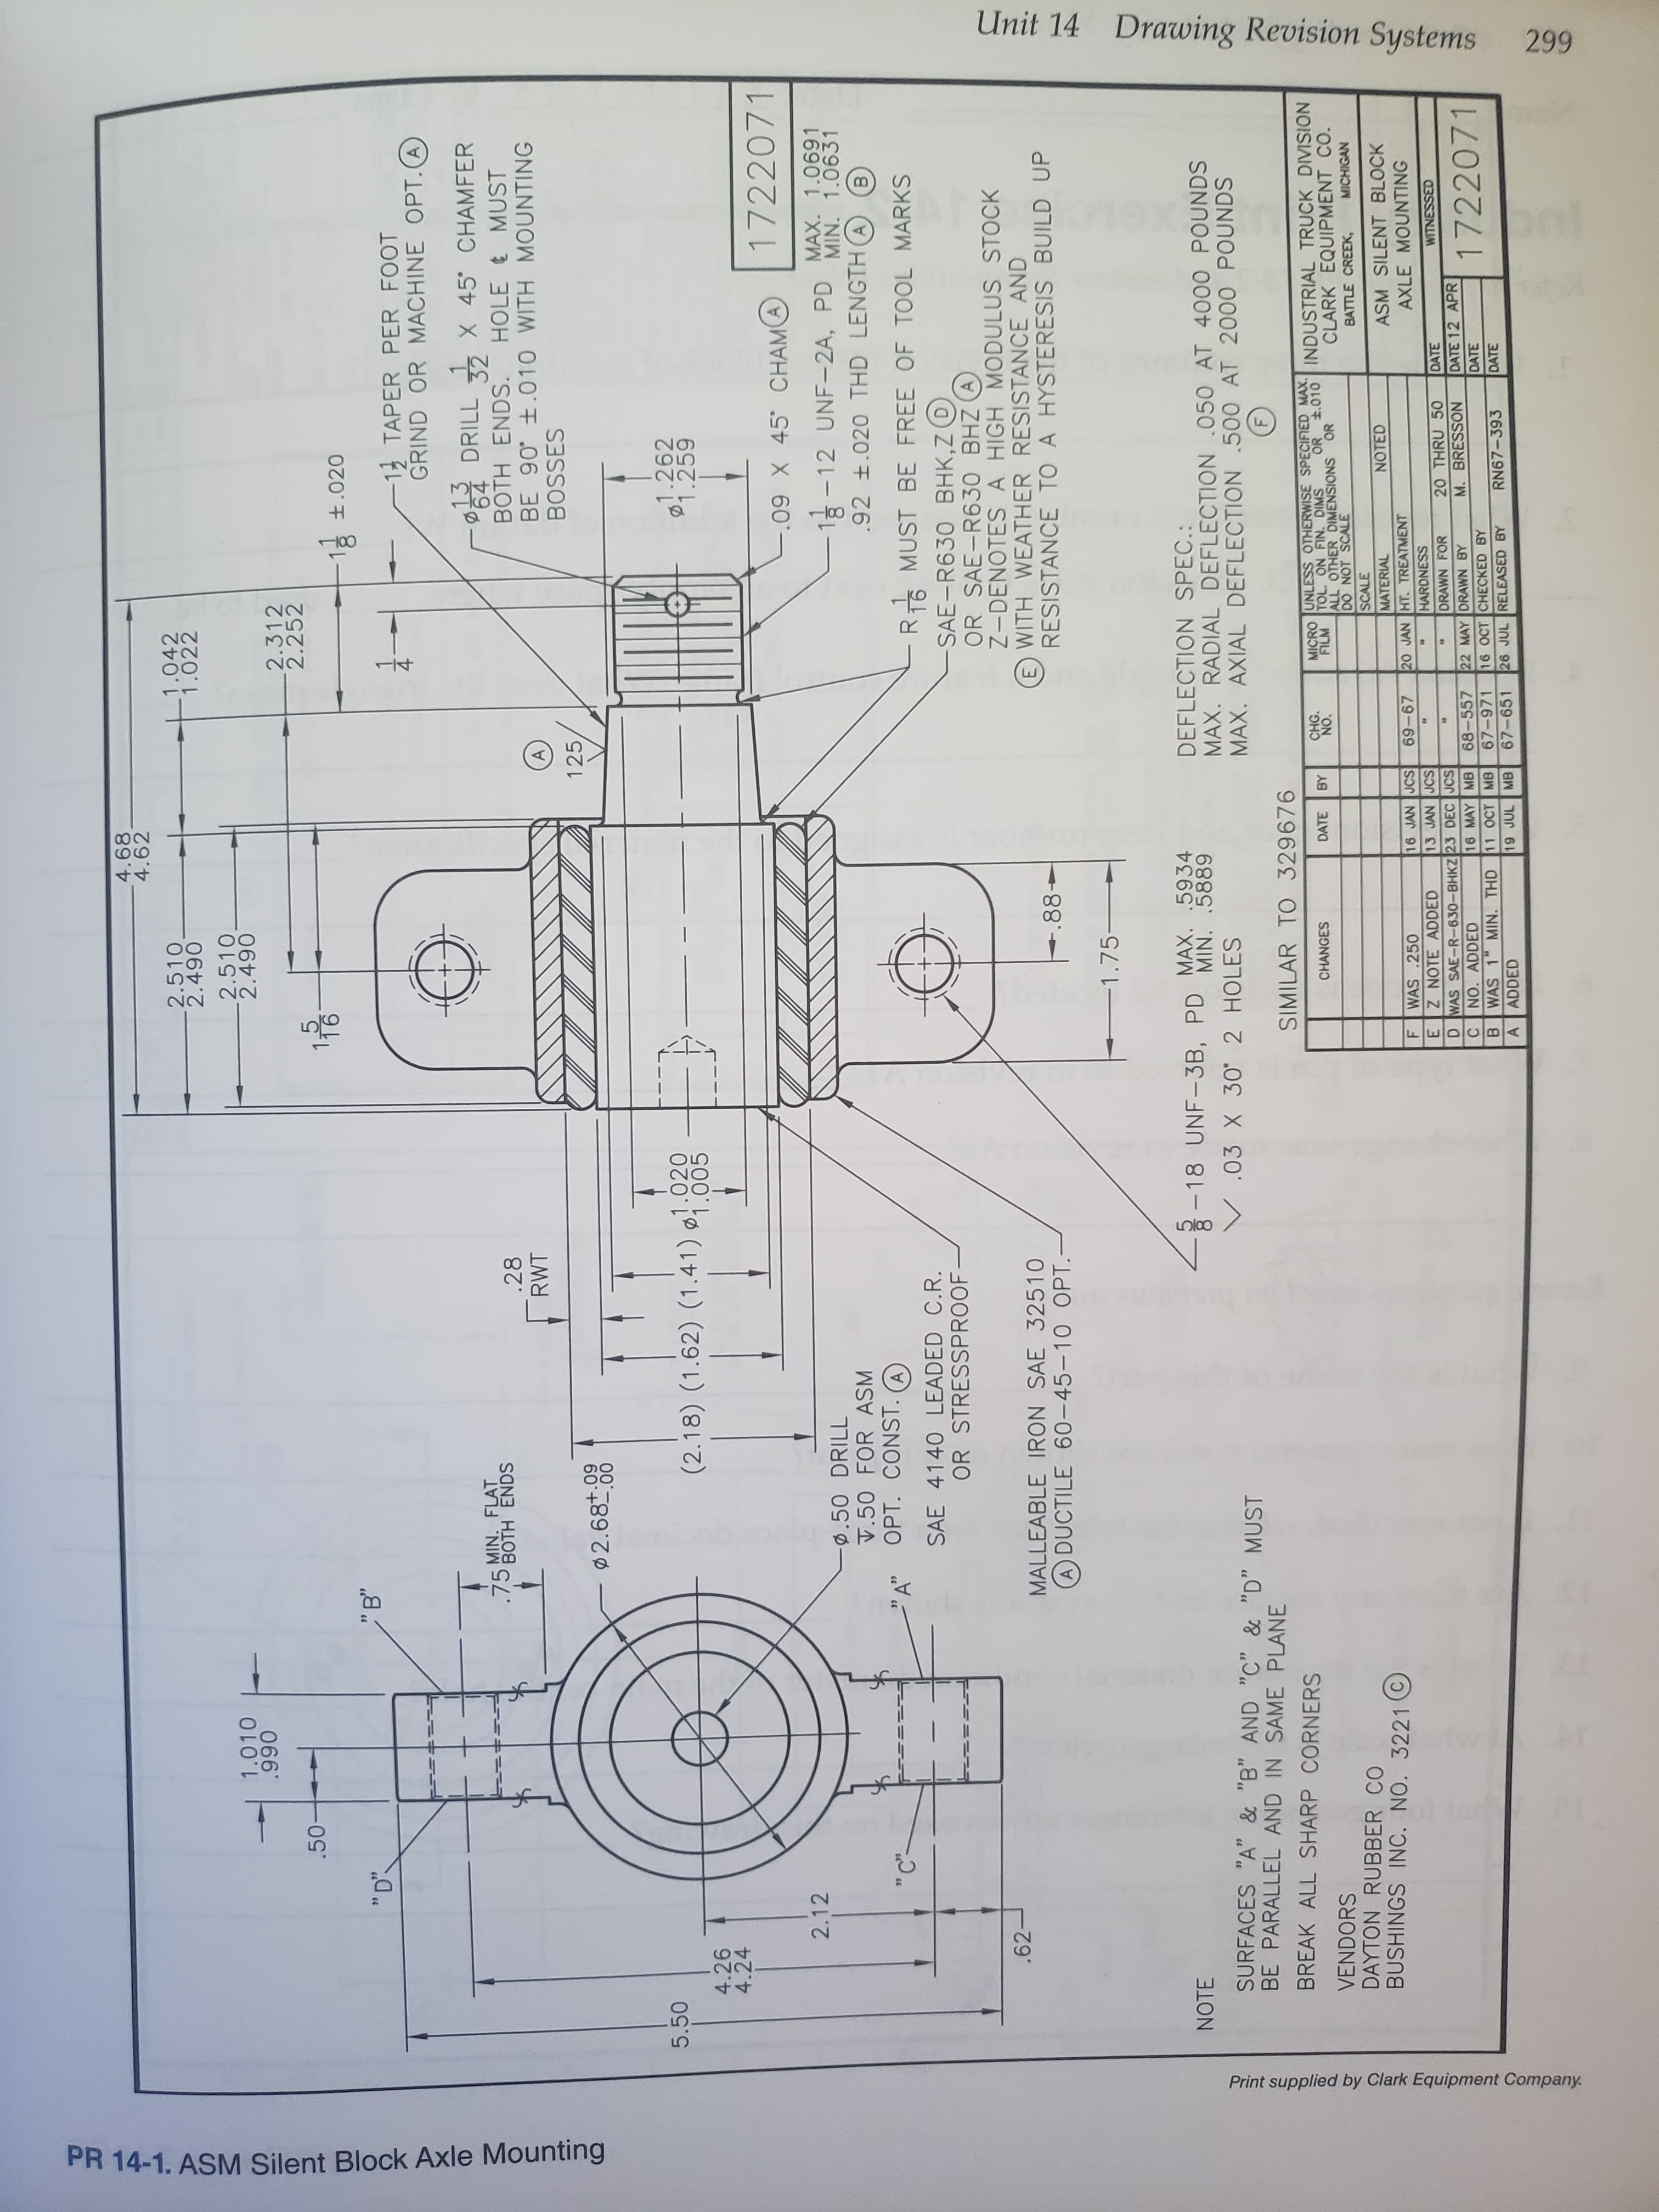 Unit 14 Drawing Revision Systems
299
100
114
Print supplied by Clark Equipment Company
PR 14-1. ASM Silent Block Axle Mounting
4.68
4.62
2.510
2.490
2.510
2.490
1.042
1.022
1.010
066
2.312
2.252
0
±.020
"D"
"B"
-12 TAPER PER FOOT
GRIND OR MACHINE OPT.(A
13
64 DRILL X 45' CHAMFER
BOTH ENDS
BE 90 t.010 WITH MOUNTING
BOSSES
MIN. FLAT
.75 BOTH ENDS
.28
RWT
HOLE MUST
125
2.68+.09
000
5.50
(2.18) (1.62) (1.41) .005
1.020
1.262
1.259
4.26
4.24
1722071
-.09 X 45 CHAMA
2.12
-ø.50 DRILL
V.50 FOR ASM
OPT. CONST.
1-12 UNF-2A, PD MAX. 1.0691
.92 t.020 THD LENGTH (A
MIN. 1.0631
"C"
"A"
MUST BE FREE OF TOOL MARKS
SAE 4140 LEAD ED C.R.
OR STRESSPROOF
-SAE-R630 BHK,Z D
OR SAE-R630 BHZ A
Z-DENOTESA HIGH MODULUS STOCK
E WITH WEATHER RESISTANCE AND
RESISTANCE TO A HYSTERESIS BUILD UP
.62
MALLEABLE IRON SAE 32510
A DUCTILE 60-45-10 OPT.
+.88
1.75-
-18 UNF-3B, PD MAX. .5934
V.03 X 30 2 HOLES
NOTE
SURFACES "A" & "B" AND "C" & "D" MUST
BE PARALLEL AND IN SAME PLANE
DEFLECTION SPEC.:
MAX. RADIAL DEFLECTION .050 AT 4000 POUNDS
MAX. AXIAL DEFLECTION 500 AT 2000 POUNDS
BREAK ALL SHARP CORNERS
SIMILAR TO 329676
MICRO UNLESS OTHERWISE SPECIFIED MAX. INDUSTRIAL TRUCK DIVISION
OR .010
CHANGES
CHG.
VENDORS
DAYTON RUBBER CO
BUSHINGS INC. NO. 3221 C
DATE
BY
TOL. ON FIN. DIMS
ALL OTHER DIMENSIONS OR
DO NOT SCALE
SCALE
MATERIAL
FILM
ON
CLARK EQUIPMENT CO.
BATTLE CREEK,
MICHIGAN
NOTED
ASM SILENT BLOCK
20 JAN HT. TREATMENT
WAS .250
Z NOTE ADDED
D WAS SAE-R-630-BHKZ 23 DEC JCS
CNO. ADDED
WAS 1 MIN. THD
A ADDED
16 JAN JCS
AXLE MOUNTING
HARDNESS
DRAWN FOR
13 JAN JCS
ea
68-557
67-971
67-651
22 MAY DRAWN BY
16 OCT CHECKED BY
26 JUL RELEASED BY
20 THRU 50
M. BRESSON
DATE
DATE 12 APR
DATE
DATE
16 MAY MB
1722071
11 OCT MB
MB
RN67-393
